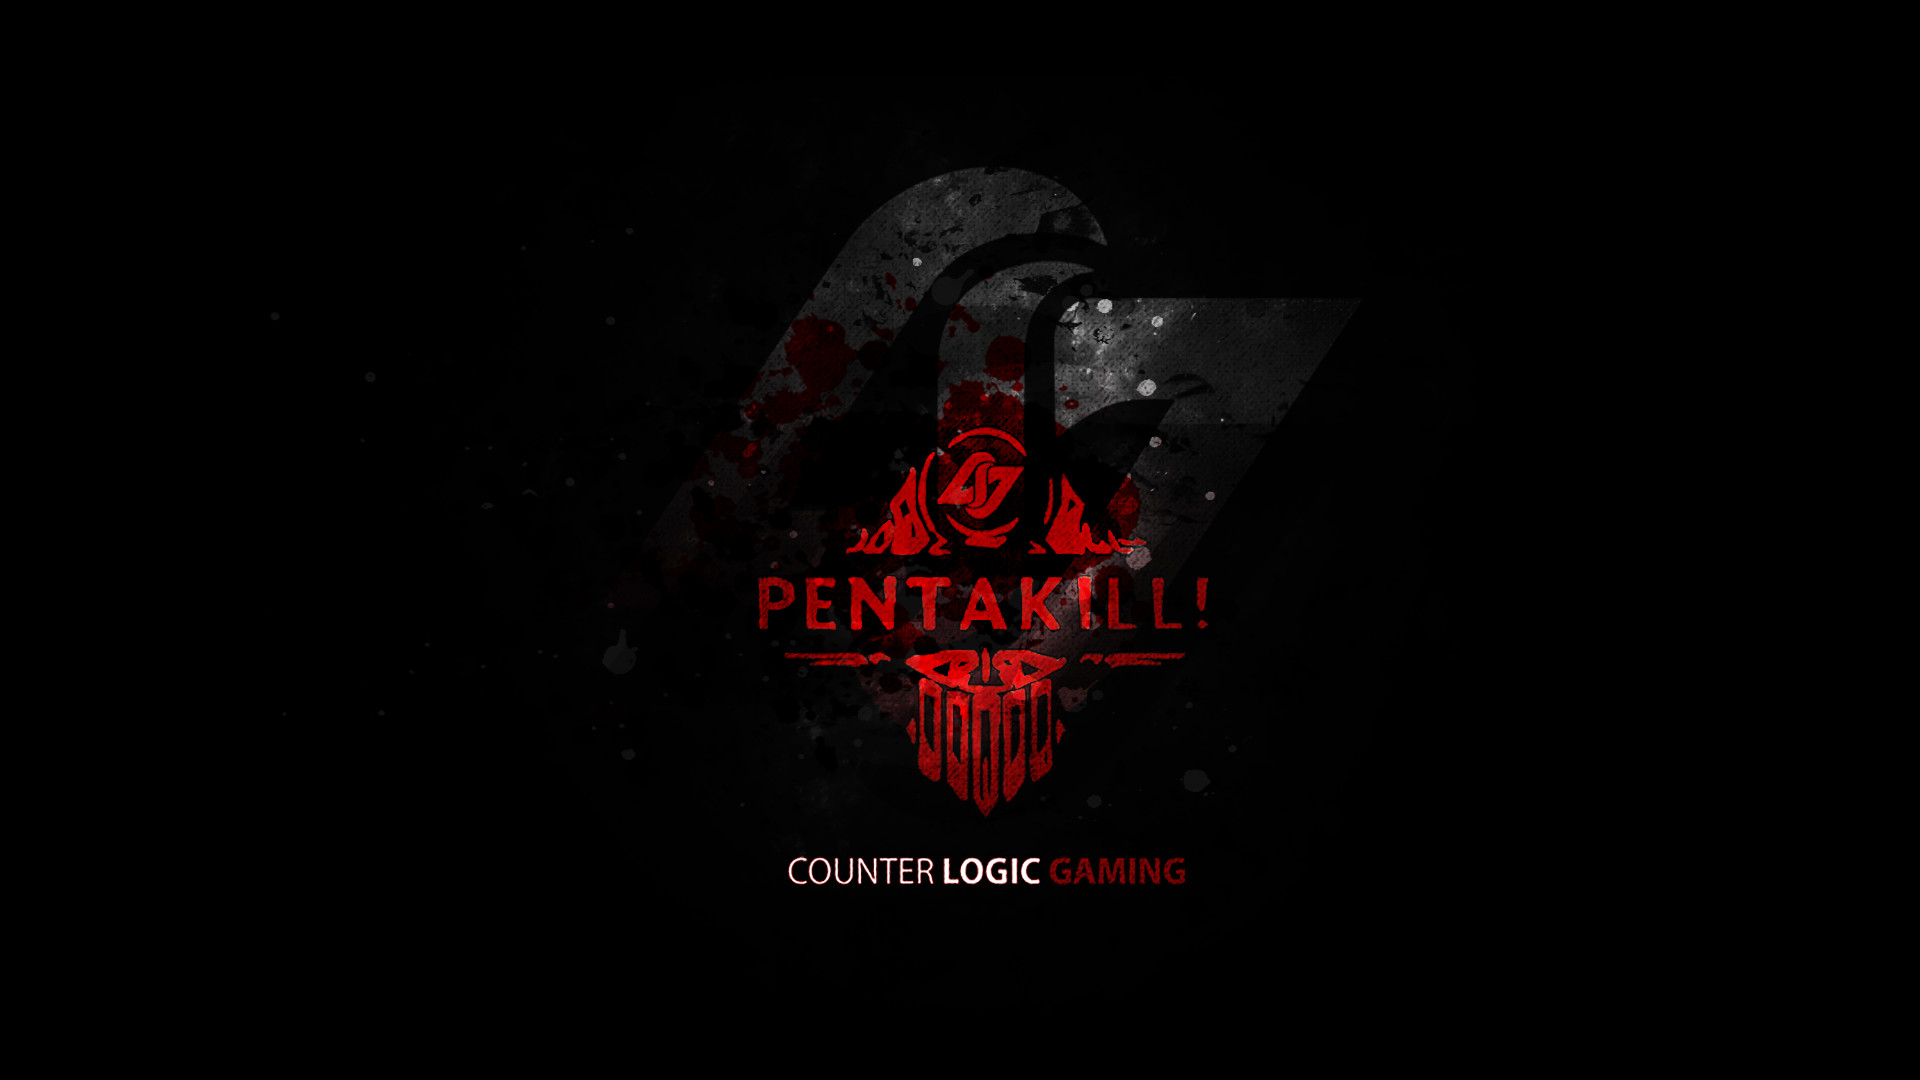 1920x1080 CLG pentakill Wallpaper 1920 by iWreckless CLG pentakill Wallpaper 1920 by  iWreckless